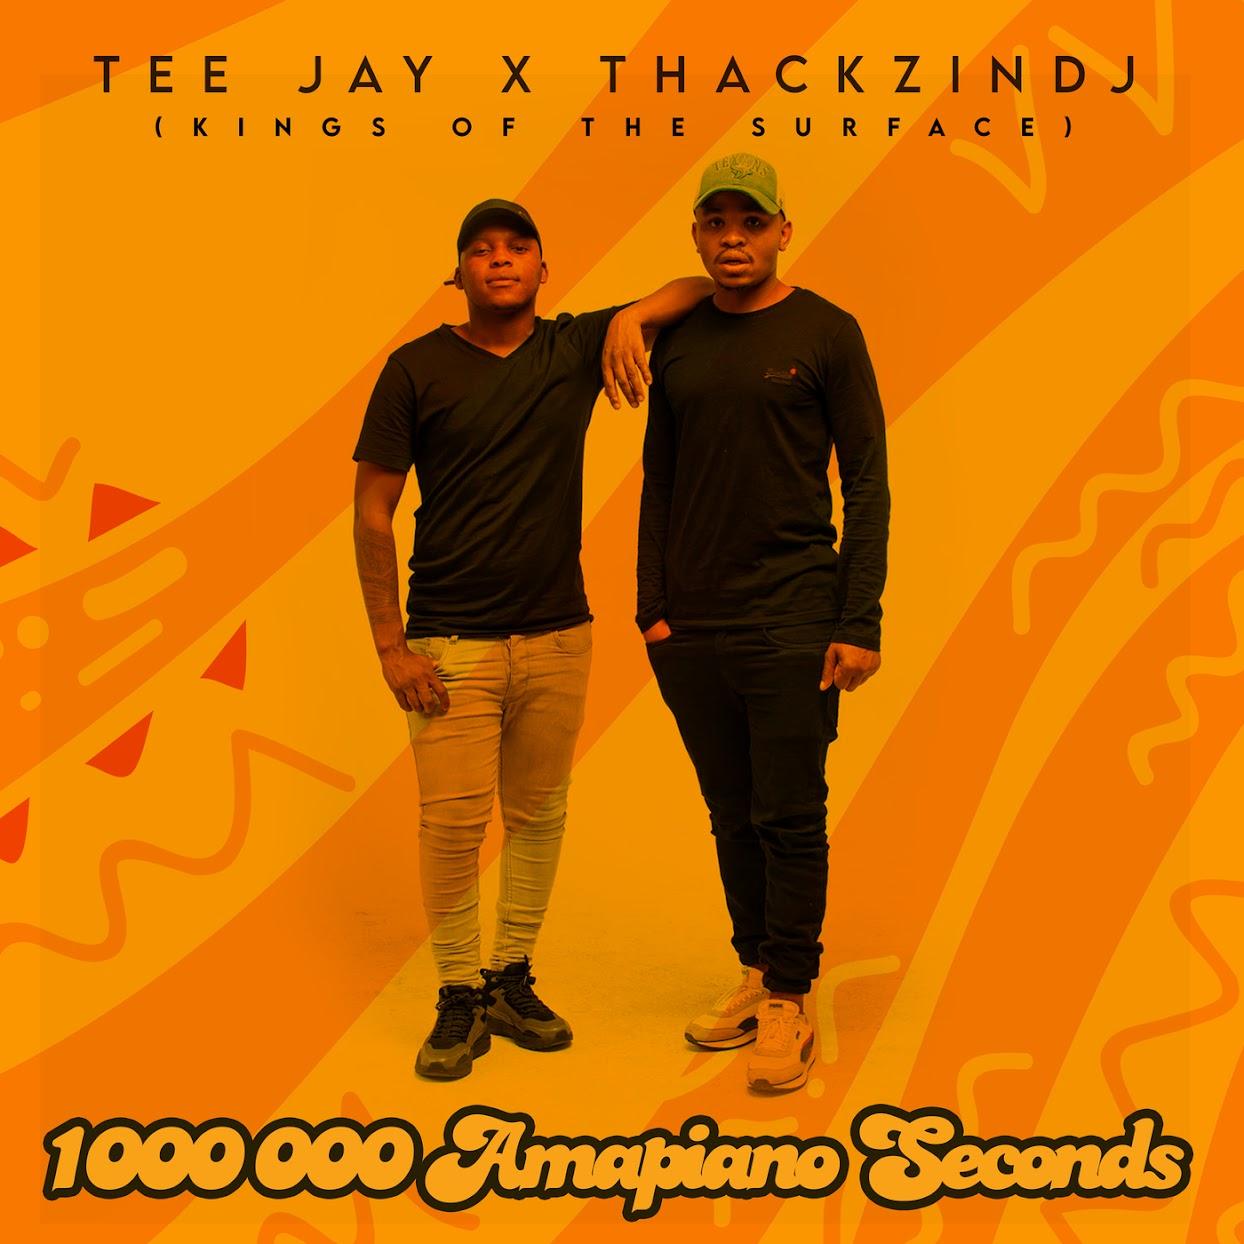 ThackzinDJ & Tee Jay – 1 000 000 Amapiano Seconds (Kings Of The Surface) (Album)